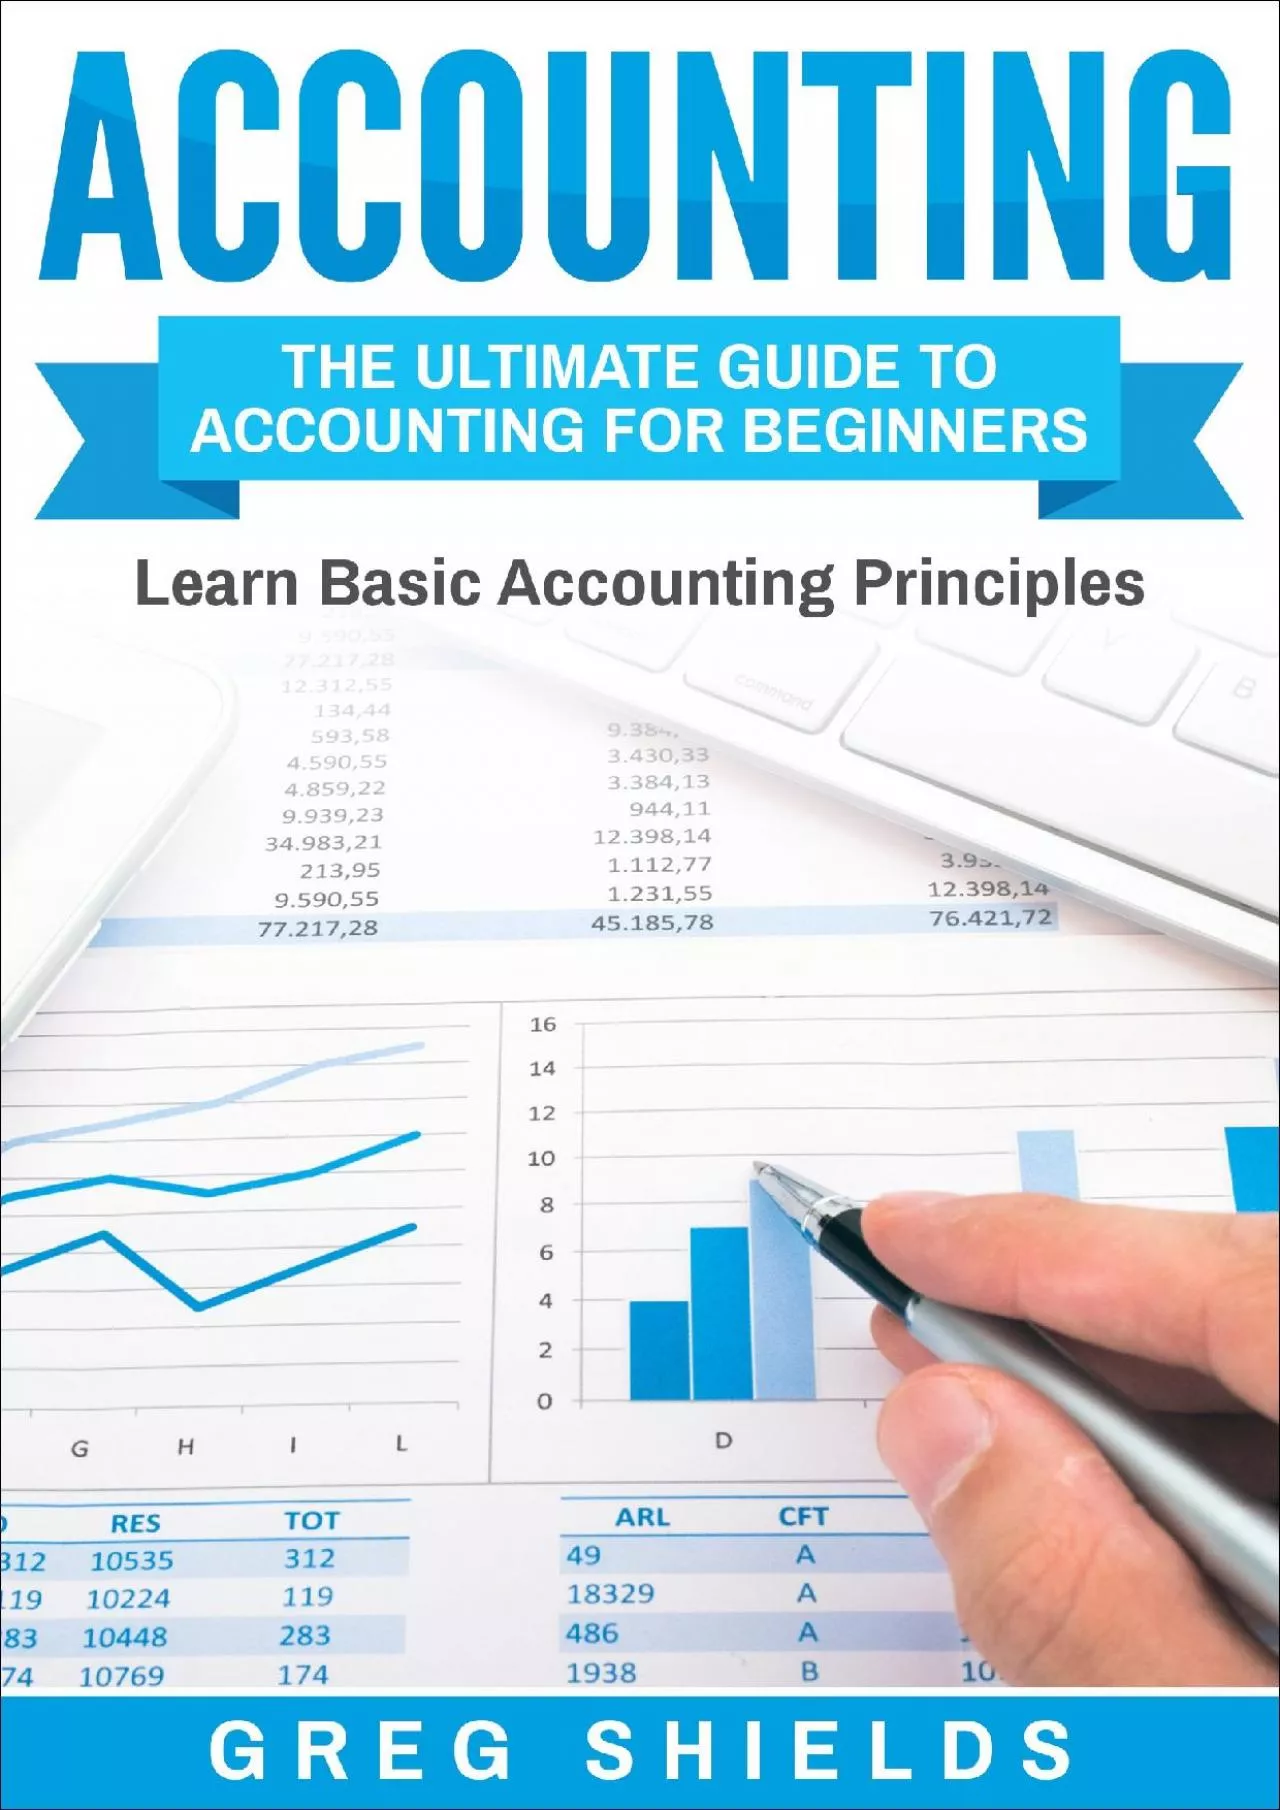 (BOOS)-Accounting: The Ultimate Guide to Accounting for Beginners – Learn the Basic